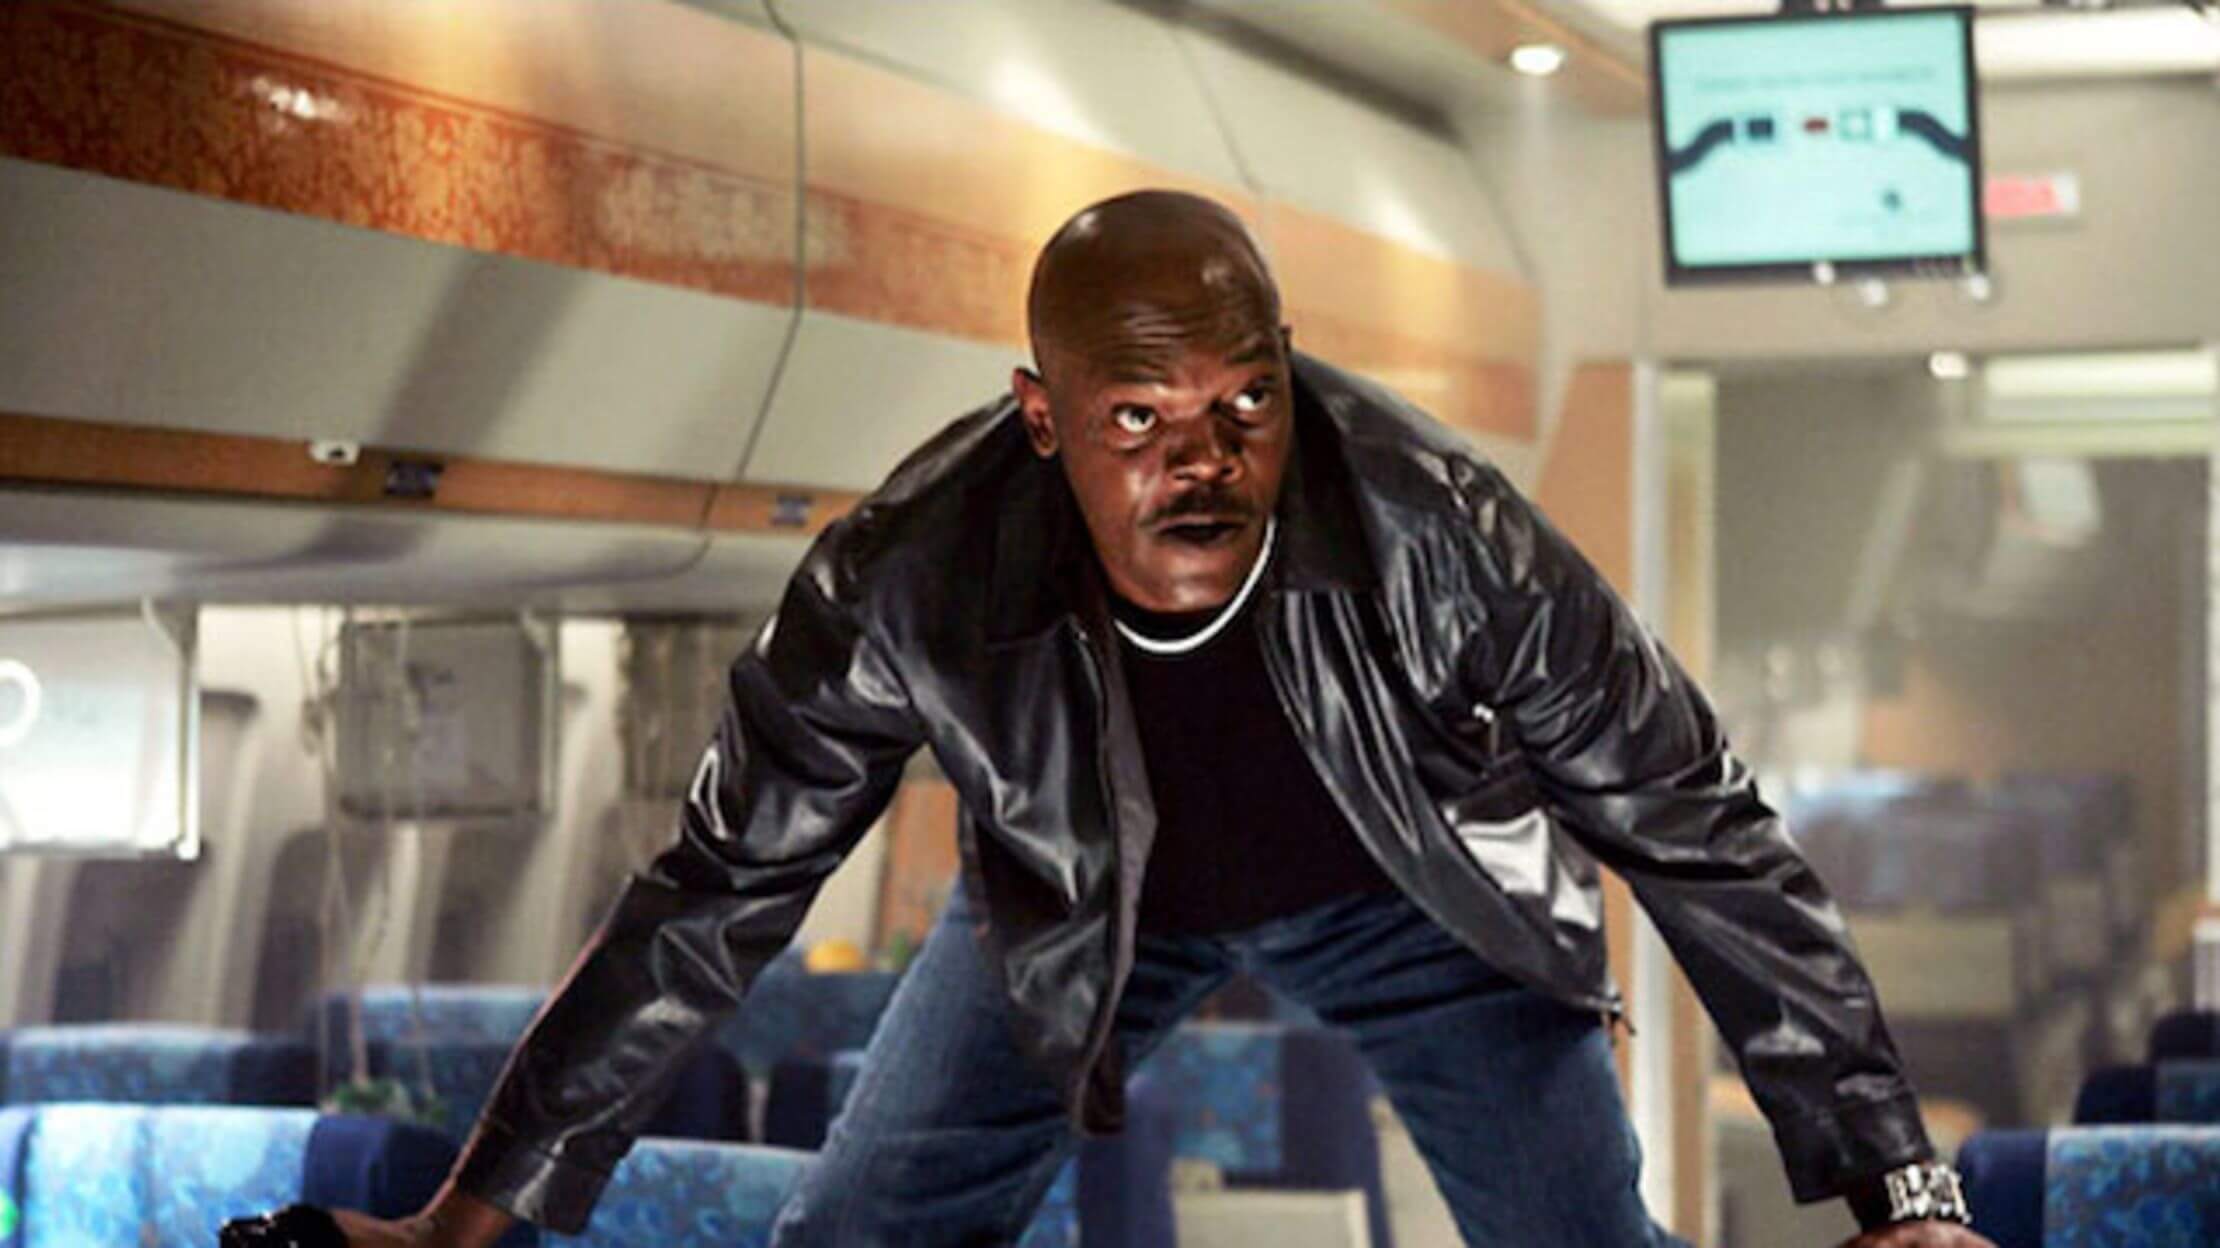 A still from Snakes on a Plane